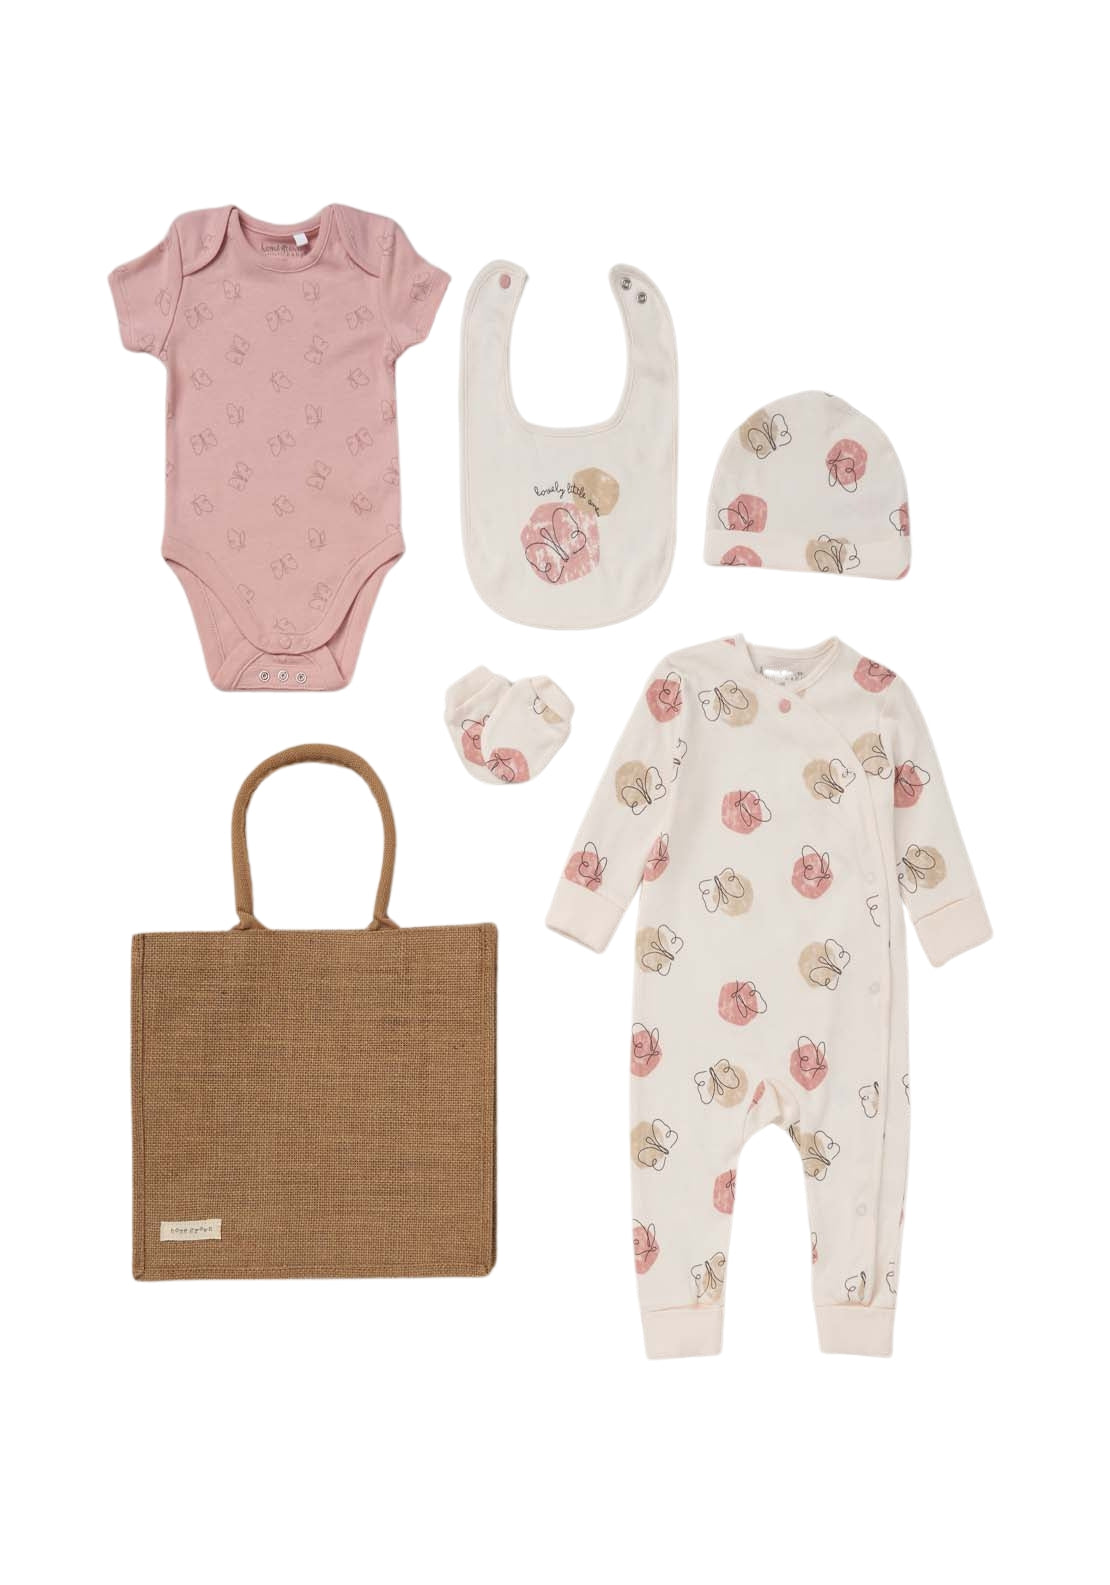 Jainco Baby Girl 5 Piece Butterfly Layette Set - Pink 1 Shaws Department Stores